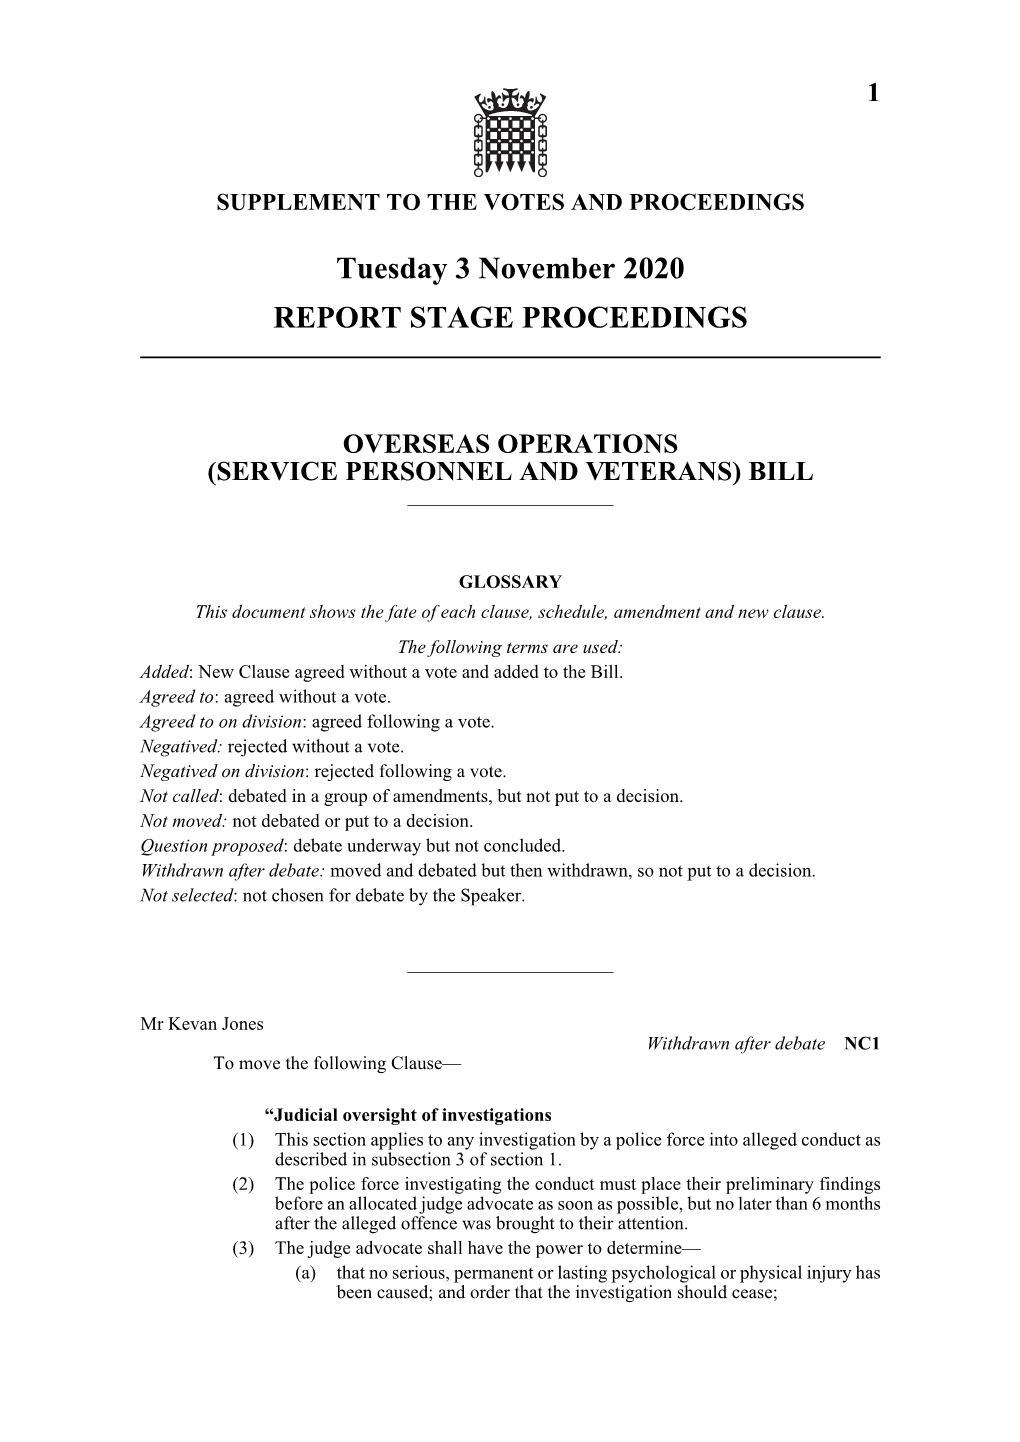 Tuesday 3 November 2020 REPORT STAGE PROCEEDINGS